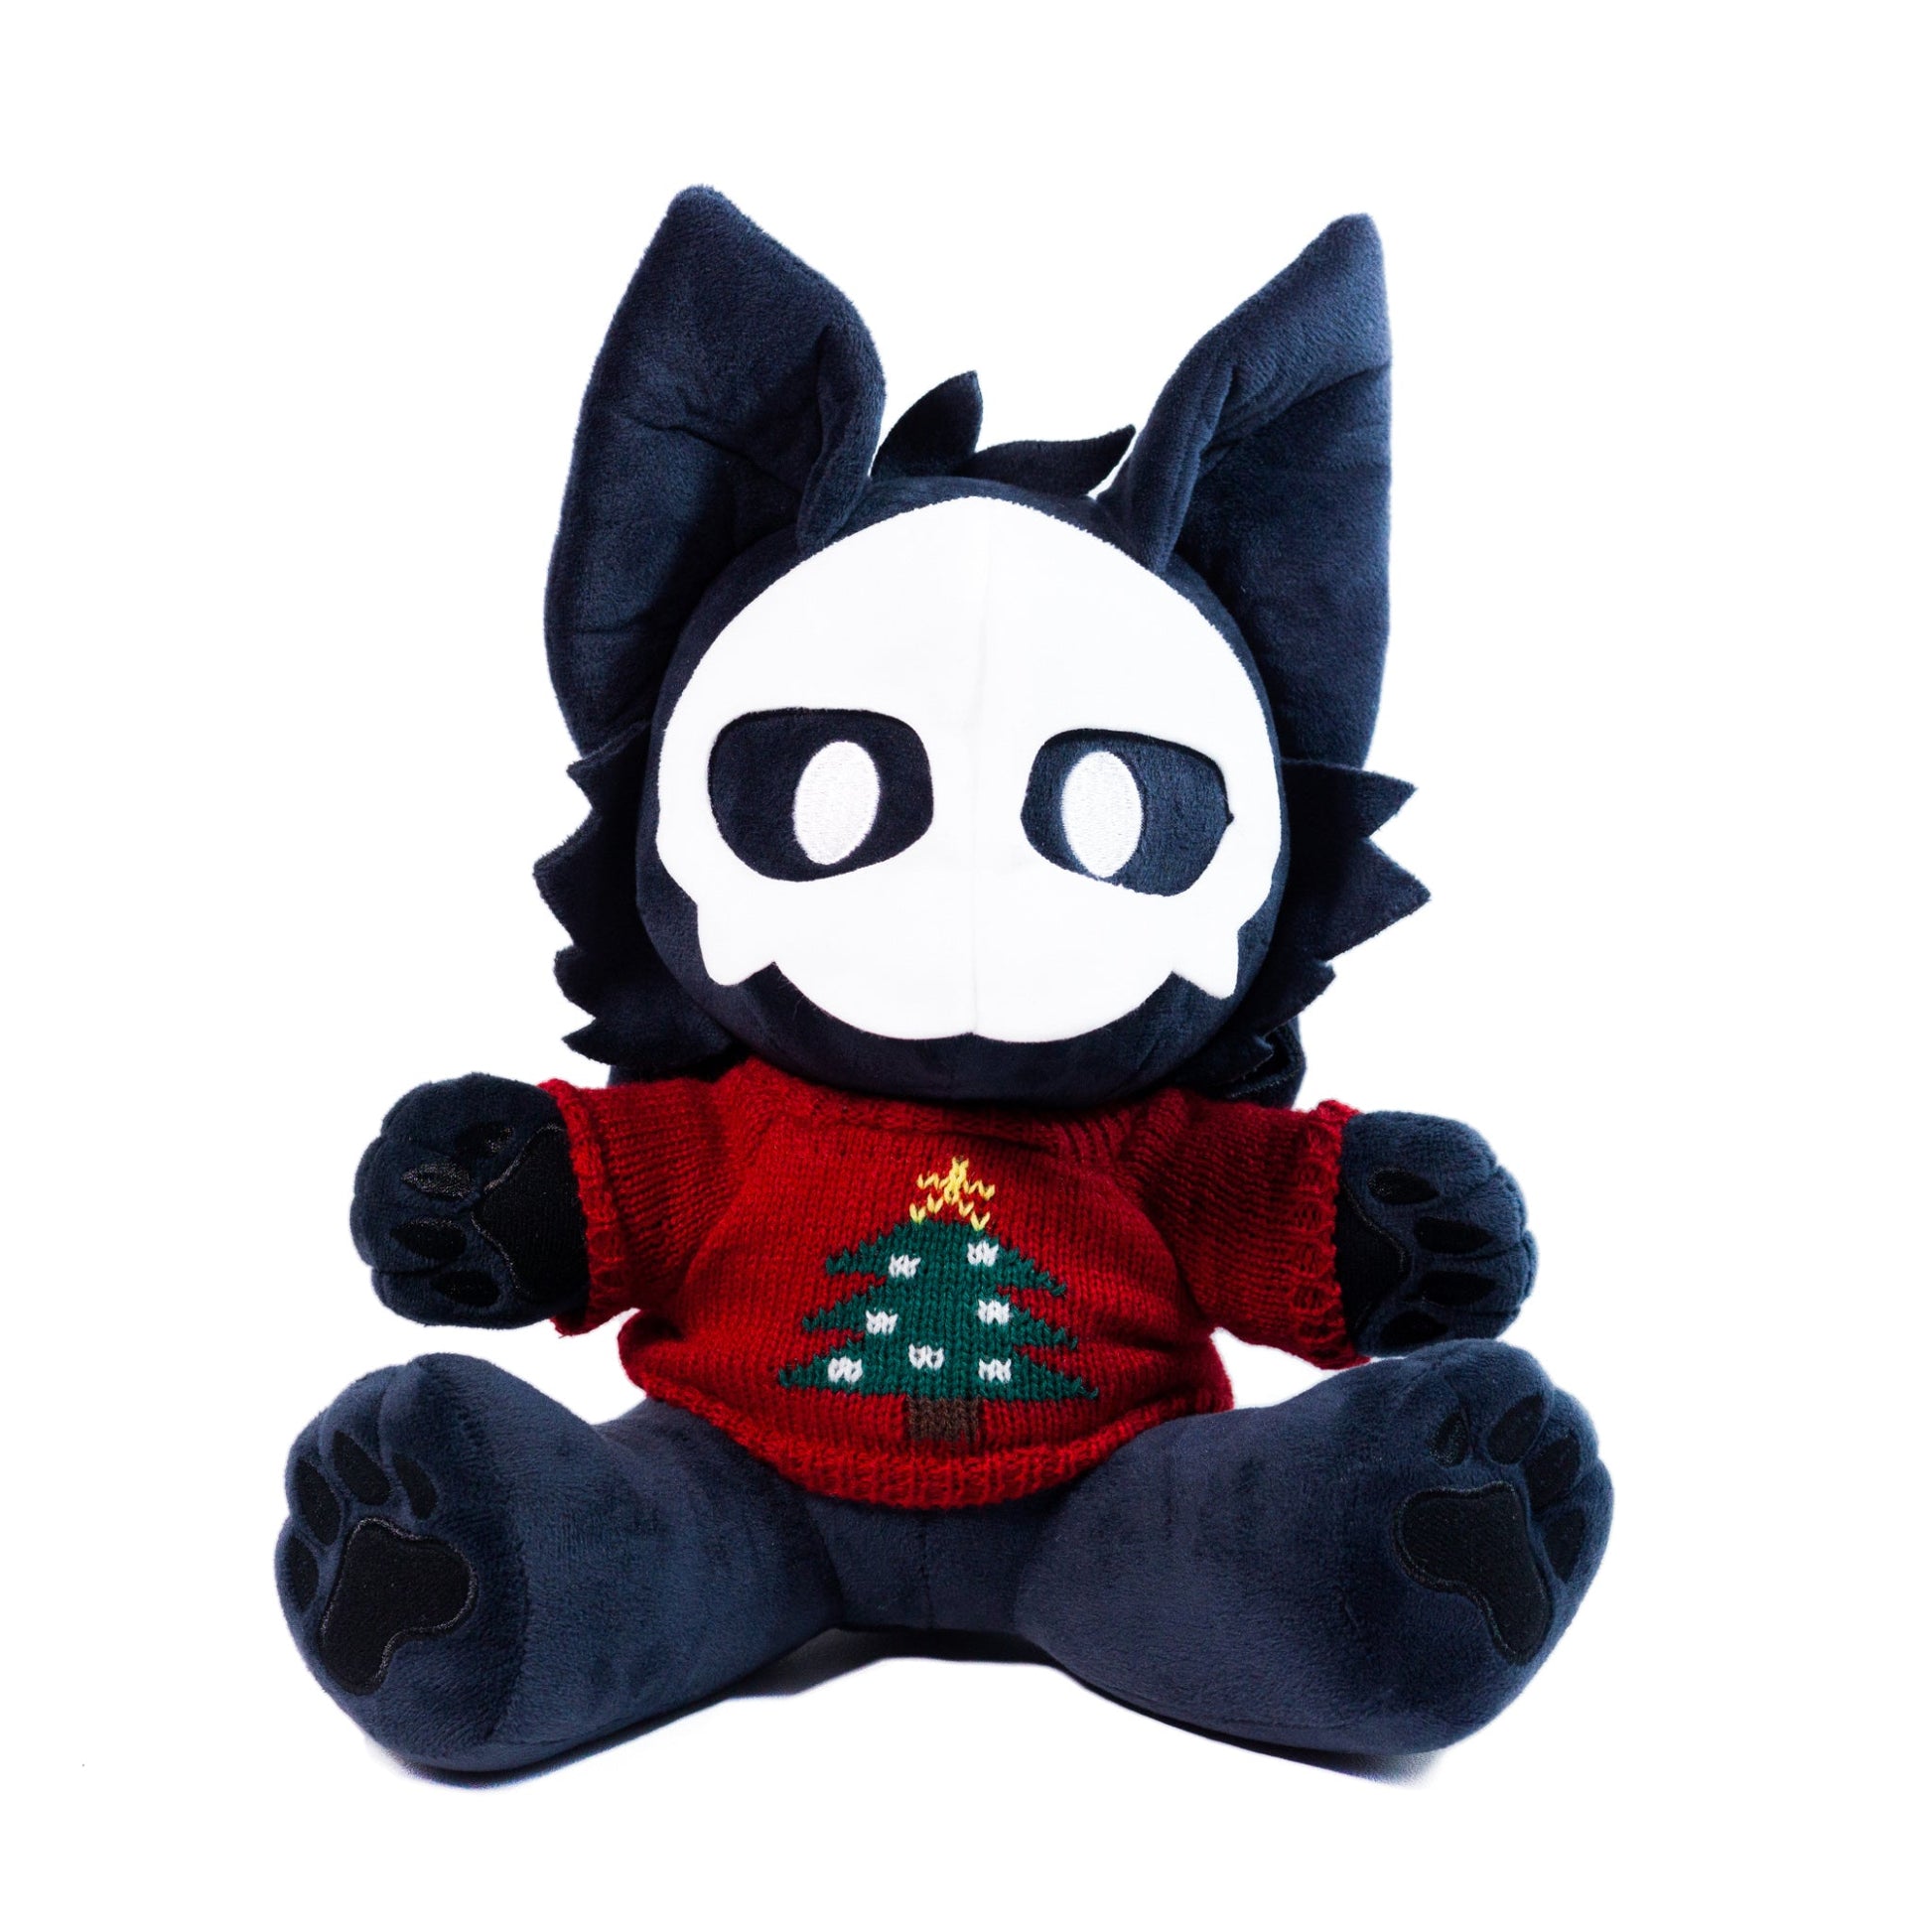 Cute Red Sweater For Puro Plush And Tiger Shark Plush